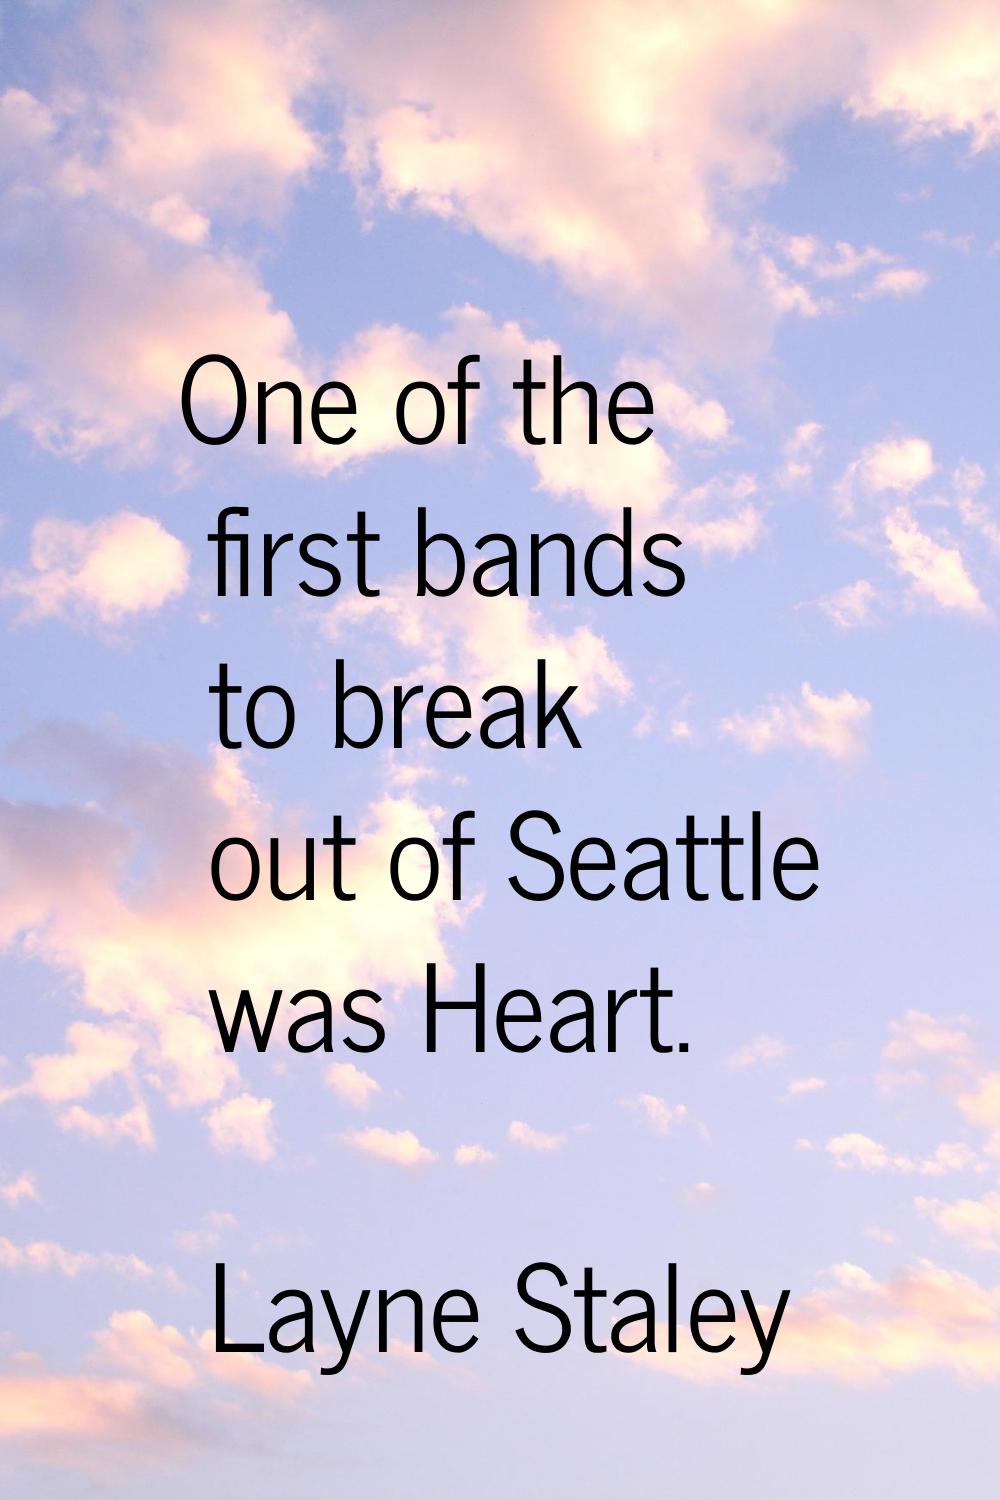 One of the first bands to break out of Seattle was Heart.